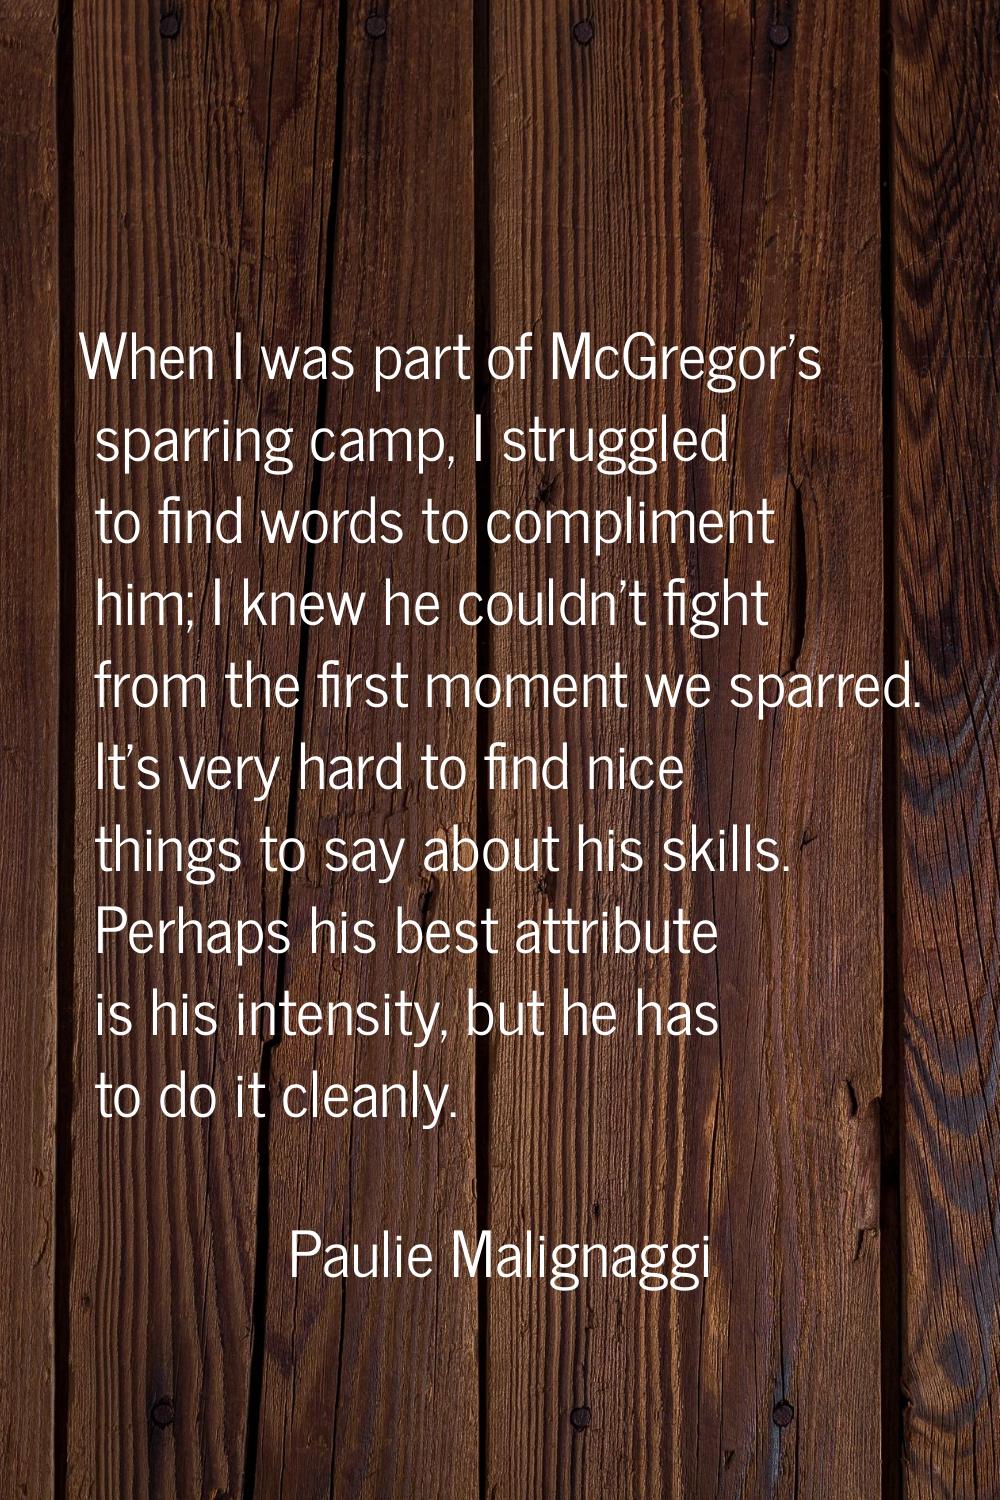 When I was part of McGregor's sparring camp, I struggled to find words to compliment him; I knew he